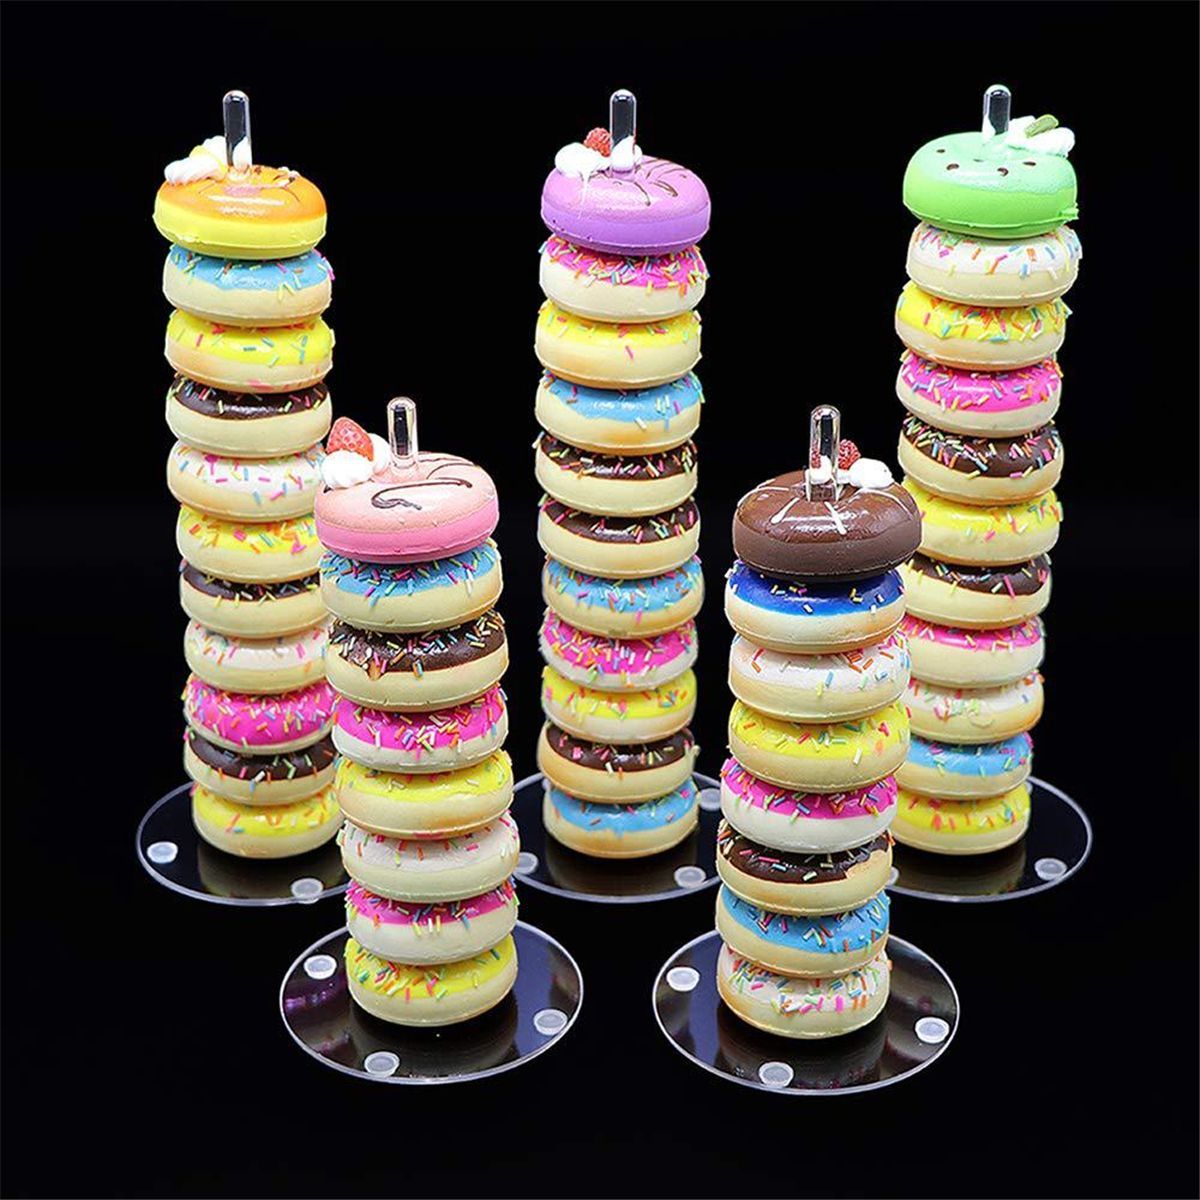 Acrylic-Doughnut-Stands-Donut-Bagels-Display-Stand-For-Wedding-Birthday-Decorations-1569927